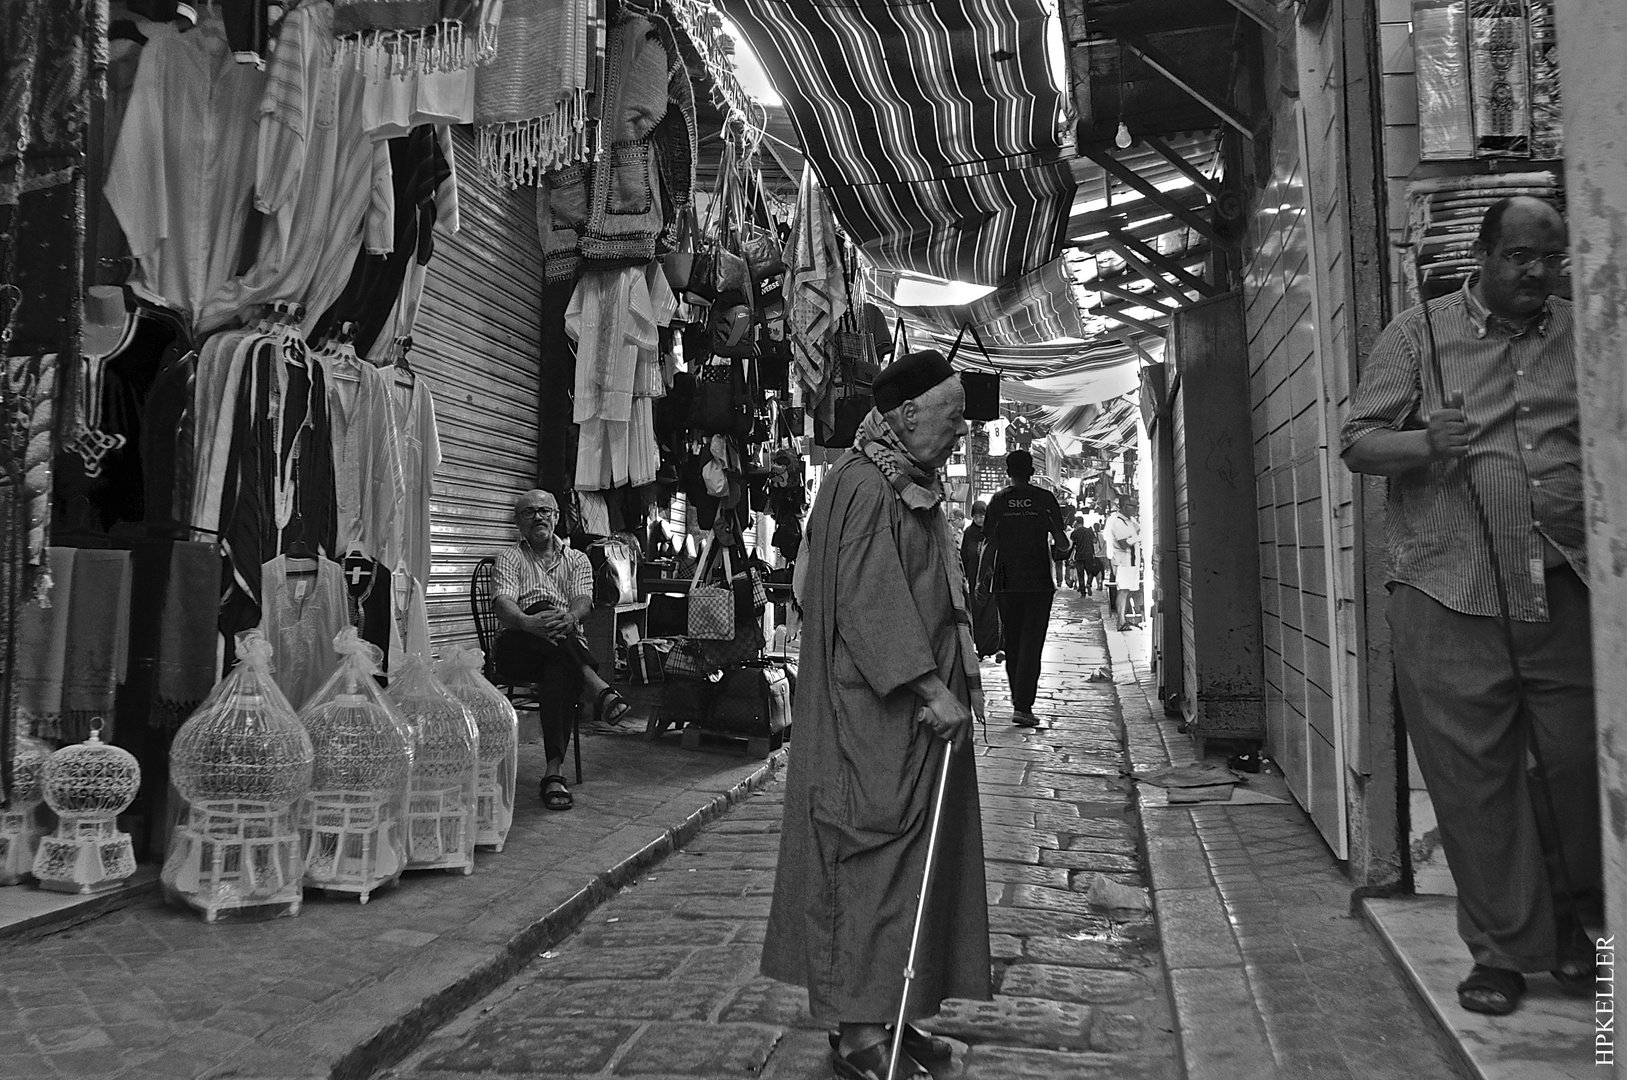 Some weeks ago in Tunis, ...in the Medina II.